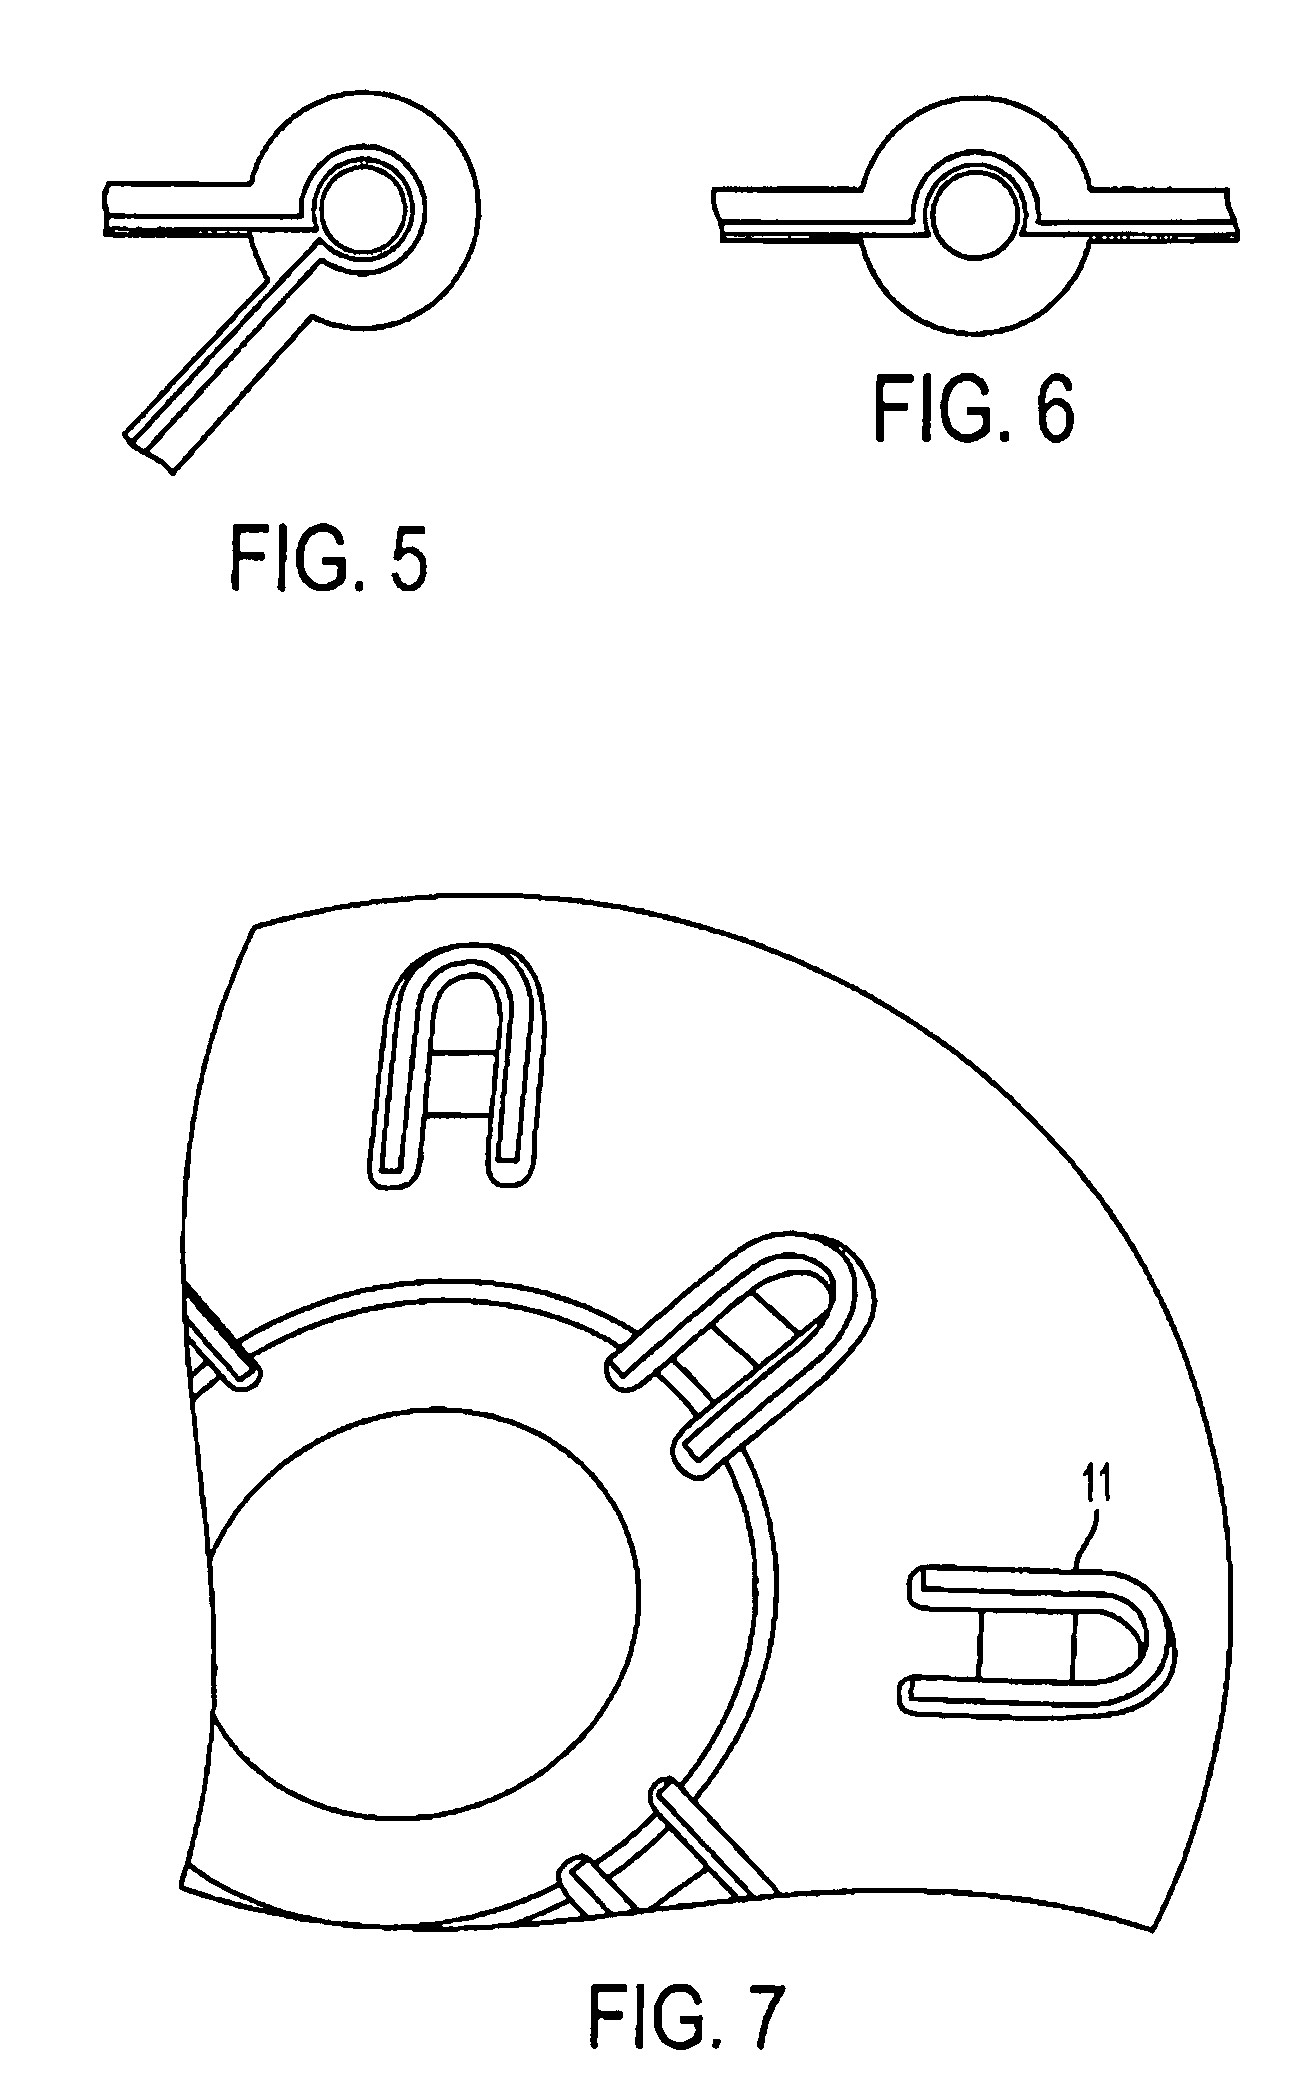 Electrical connector for connecting a plurality of printed circuits